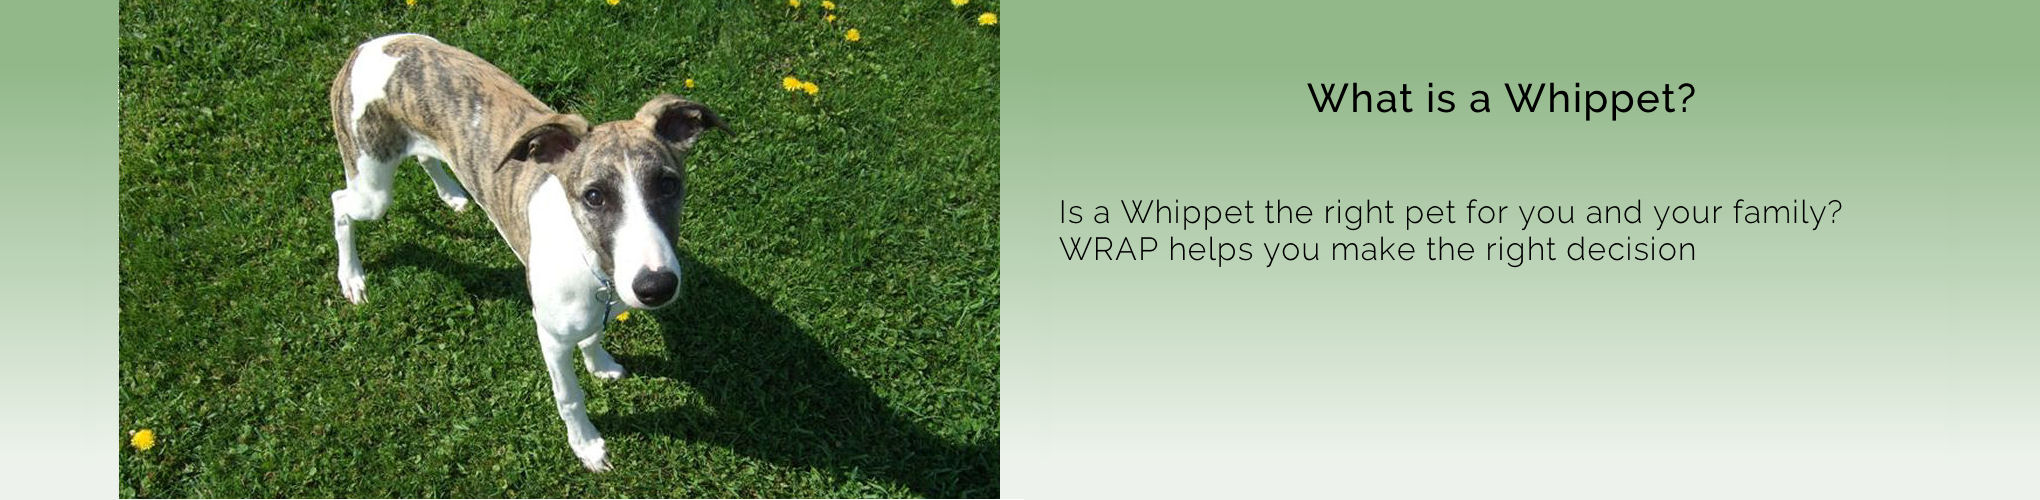 wrap whippet rescue